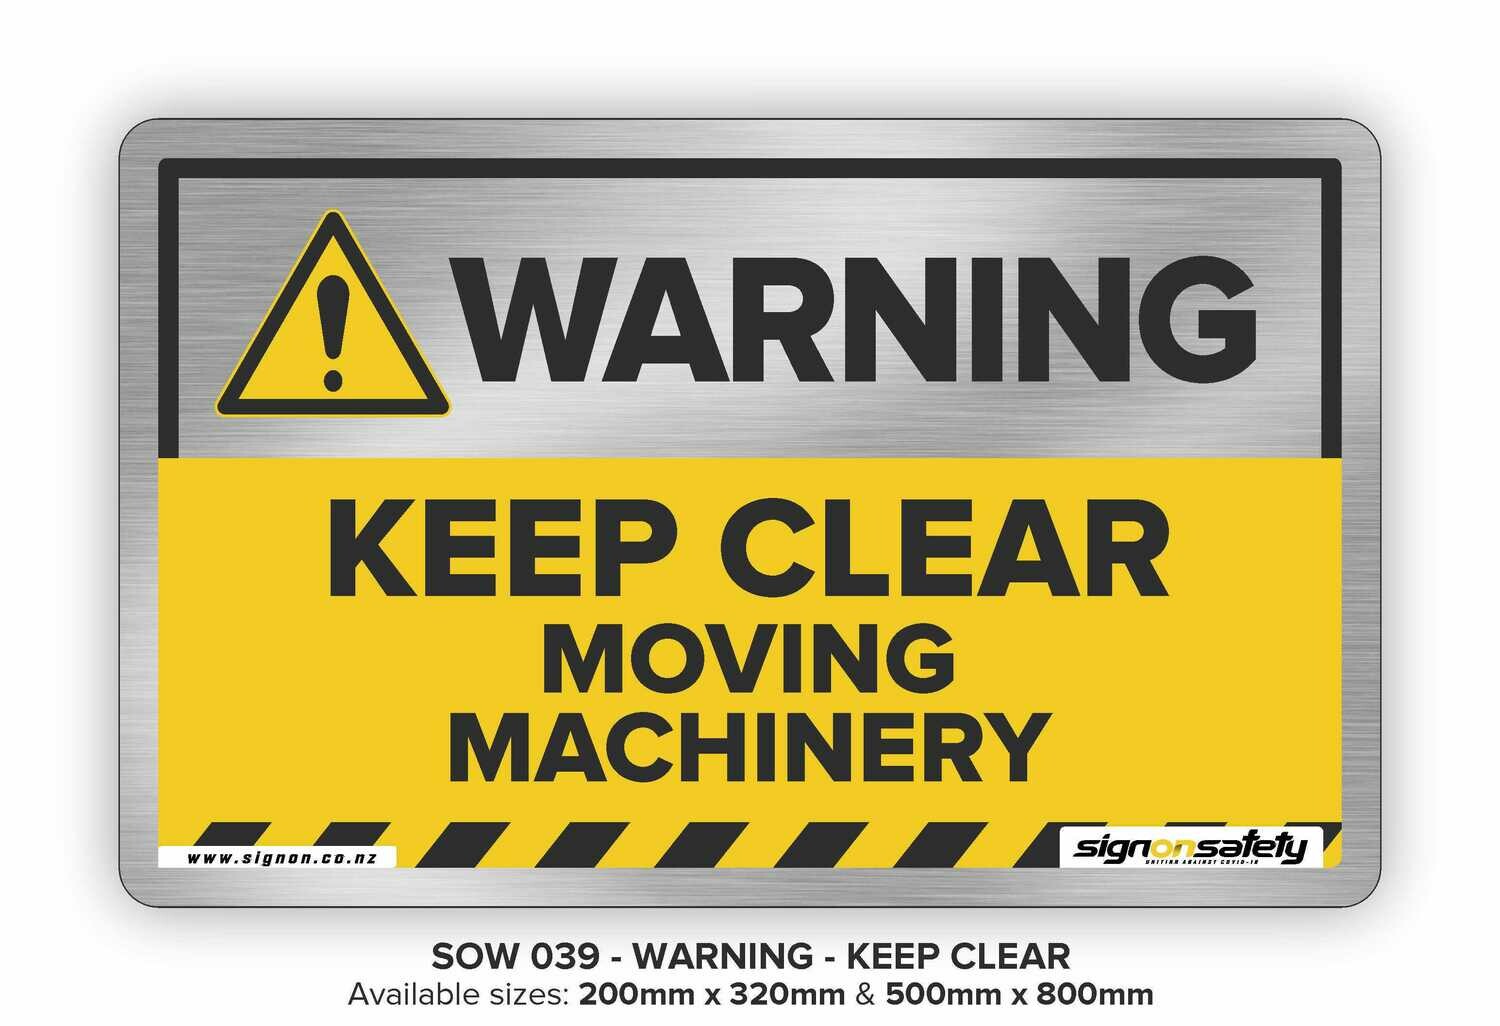 Warning - Keep Clear Moving Machinery